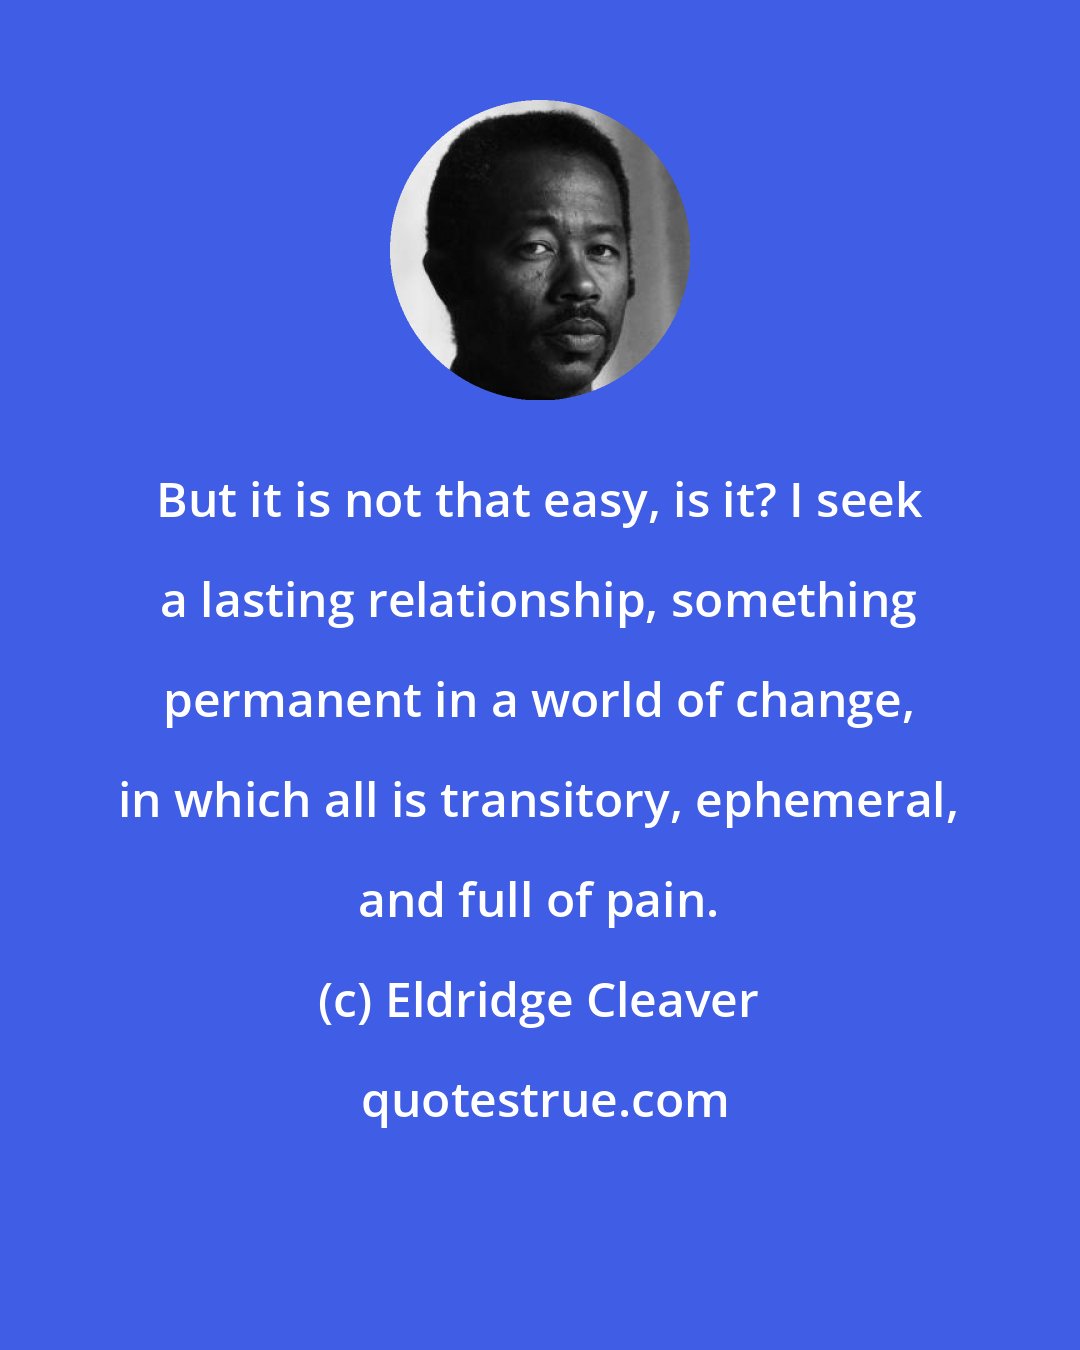 Eldridge Cleaver: But it is not that easy, is it? I seek a lasting relationship, something permanent in a world of change, in which all is transitory, ephemeral, and full of pain.